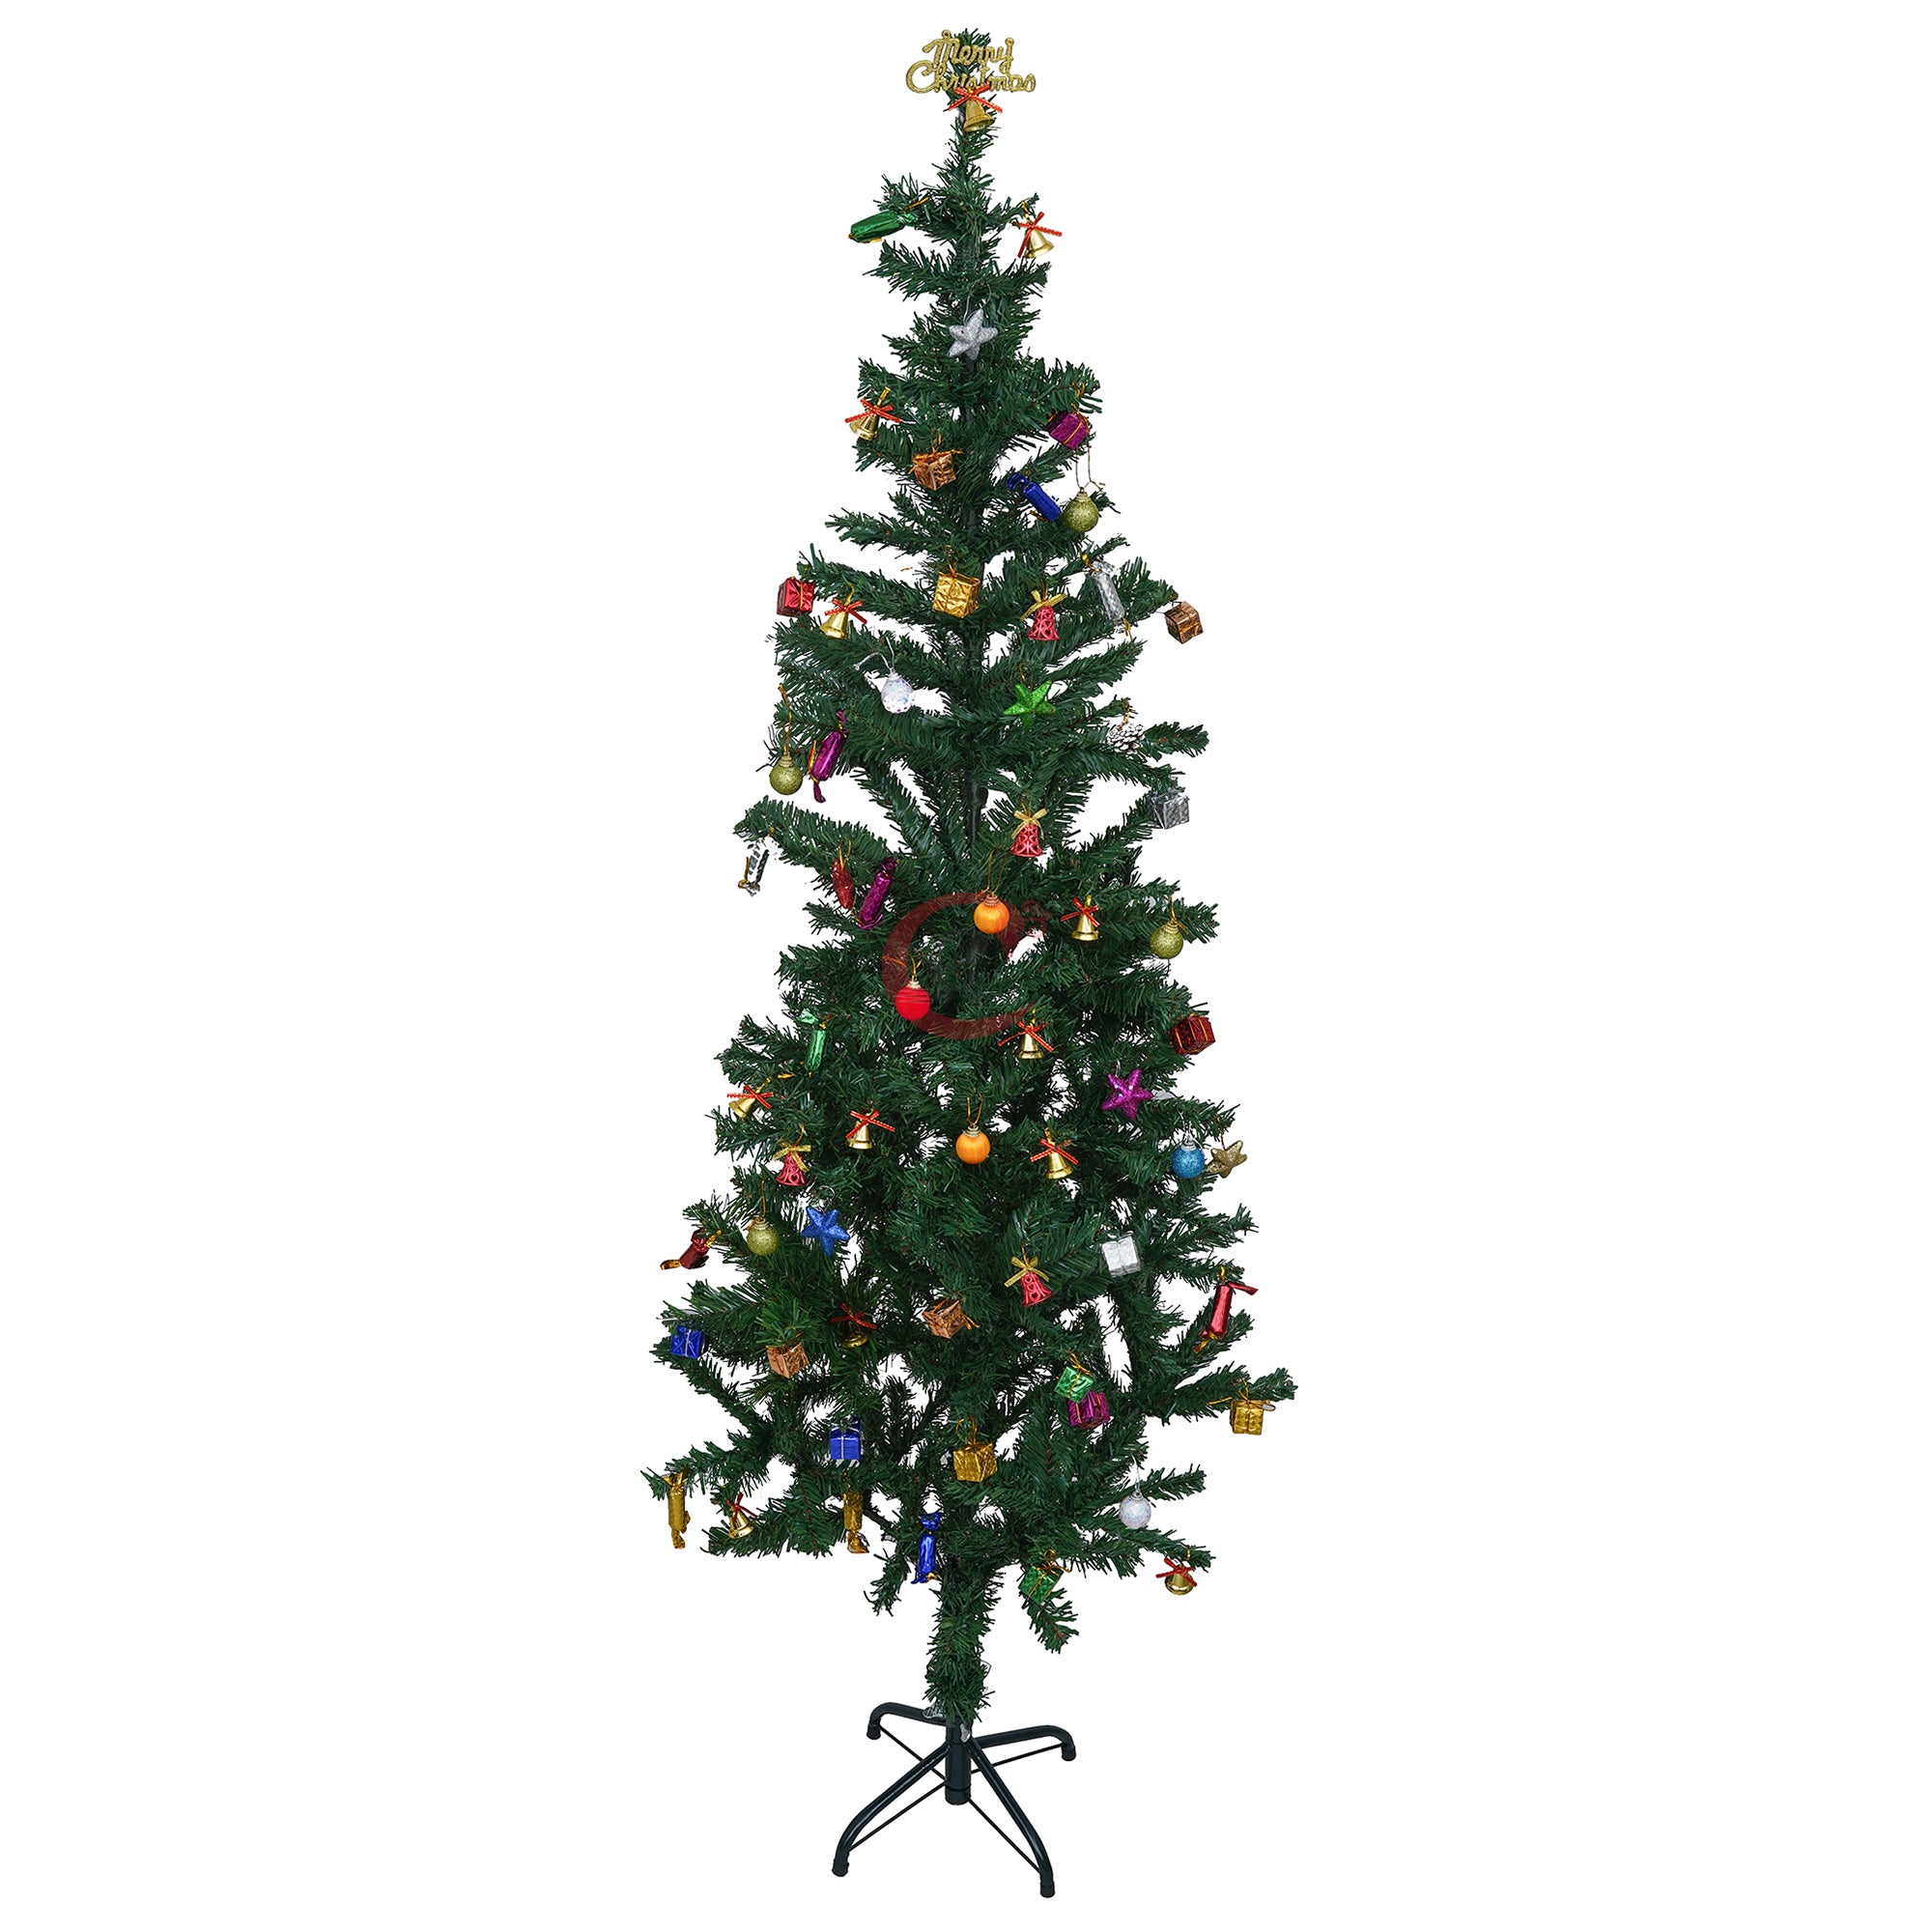 eCraftIndia 5 Feet Green Artificial Christmas Tree Xmas Pine Tree with Metal Stand - Xmas Tree for Indoor, Outdoor, Home, Living Room, Office, Church Decor - Merry Christmas Decoration Item 8